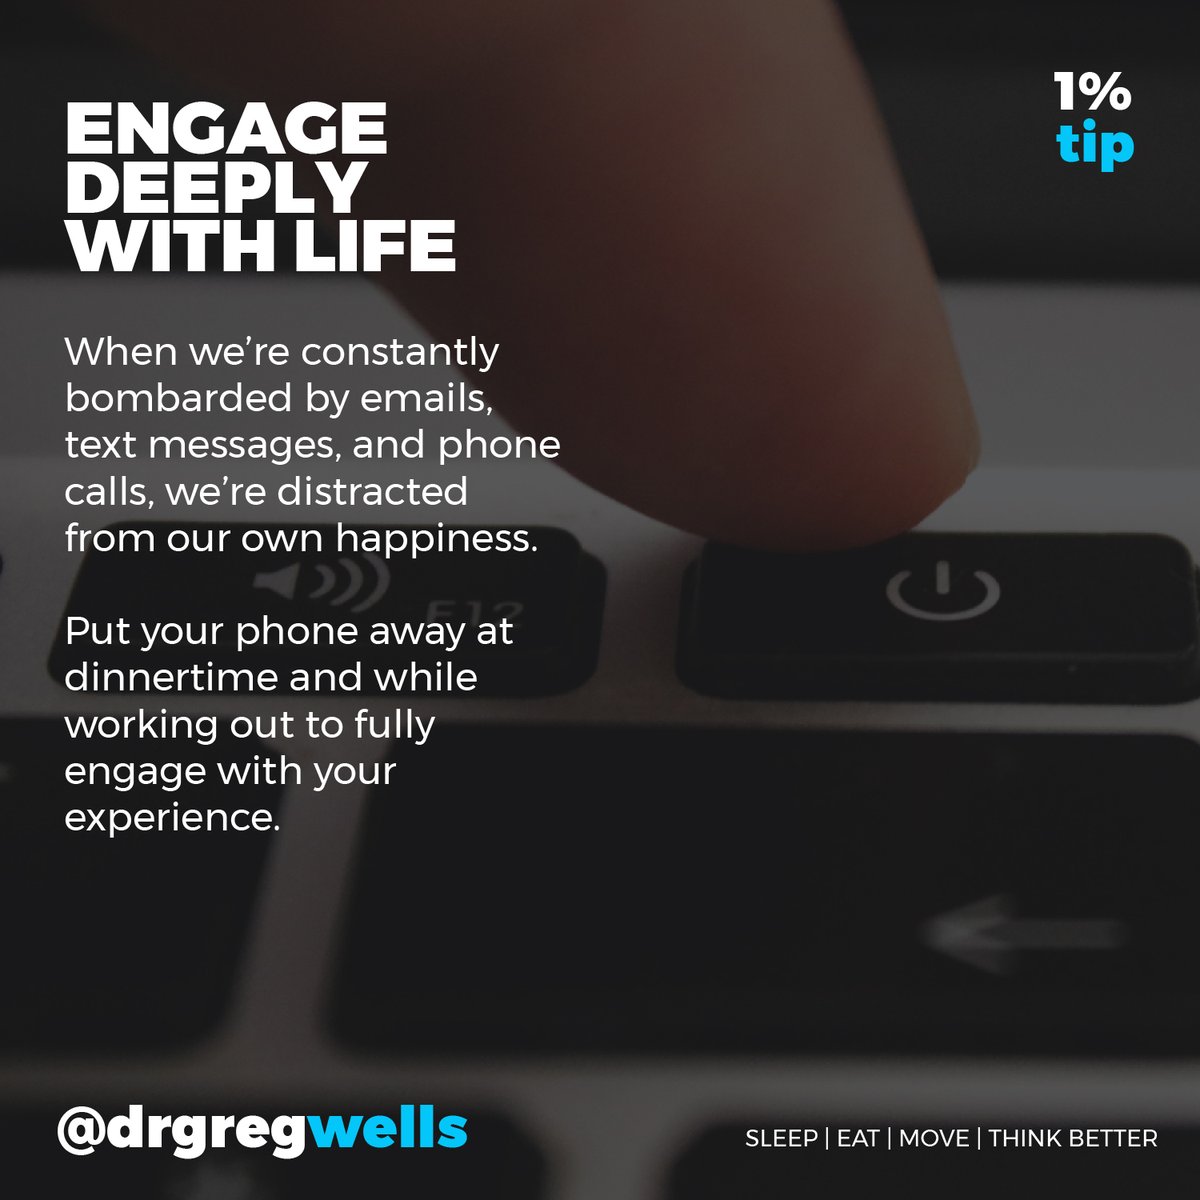 Think Clearly 1% Tip: Engage Deliberately with Life

Learn more about healthy high-performance on my blog: drgregwells.com/blog.

#sharpenyouredge #mentalhealth #breathe #journaling #wellness #healthylifestyle #mindset #brain #creativity #mindful #meditation #gratitude